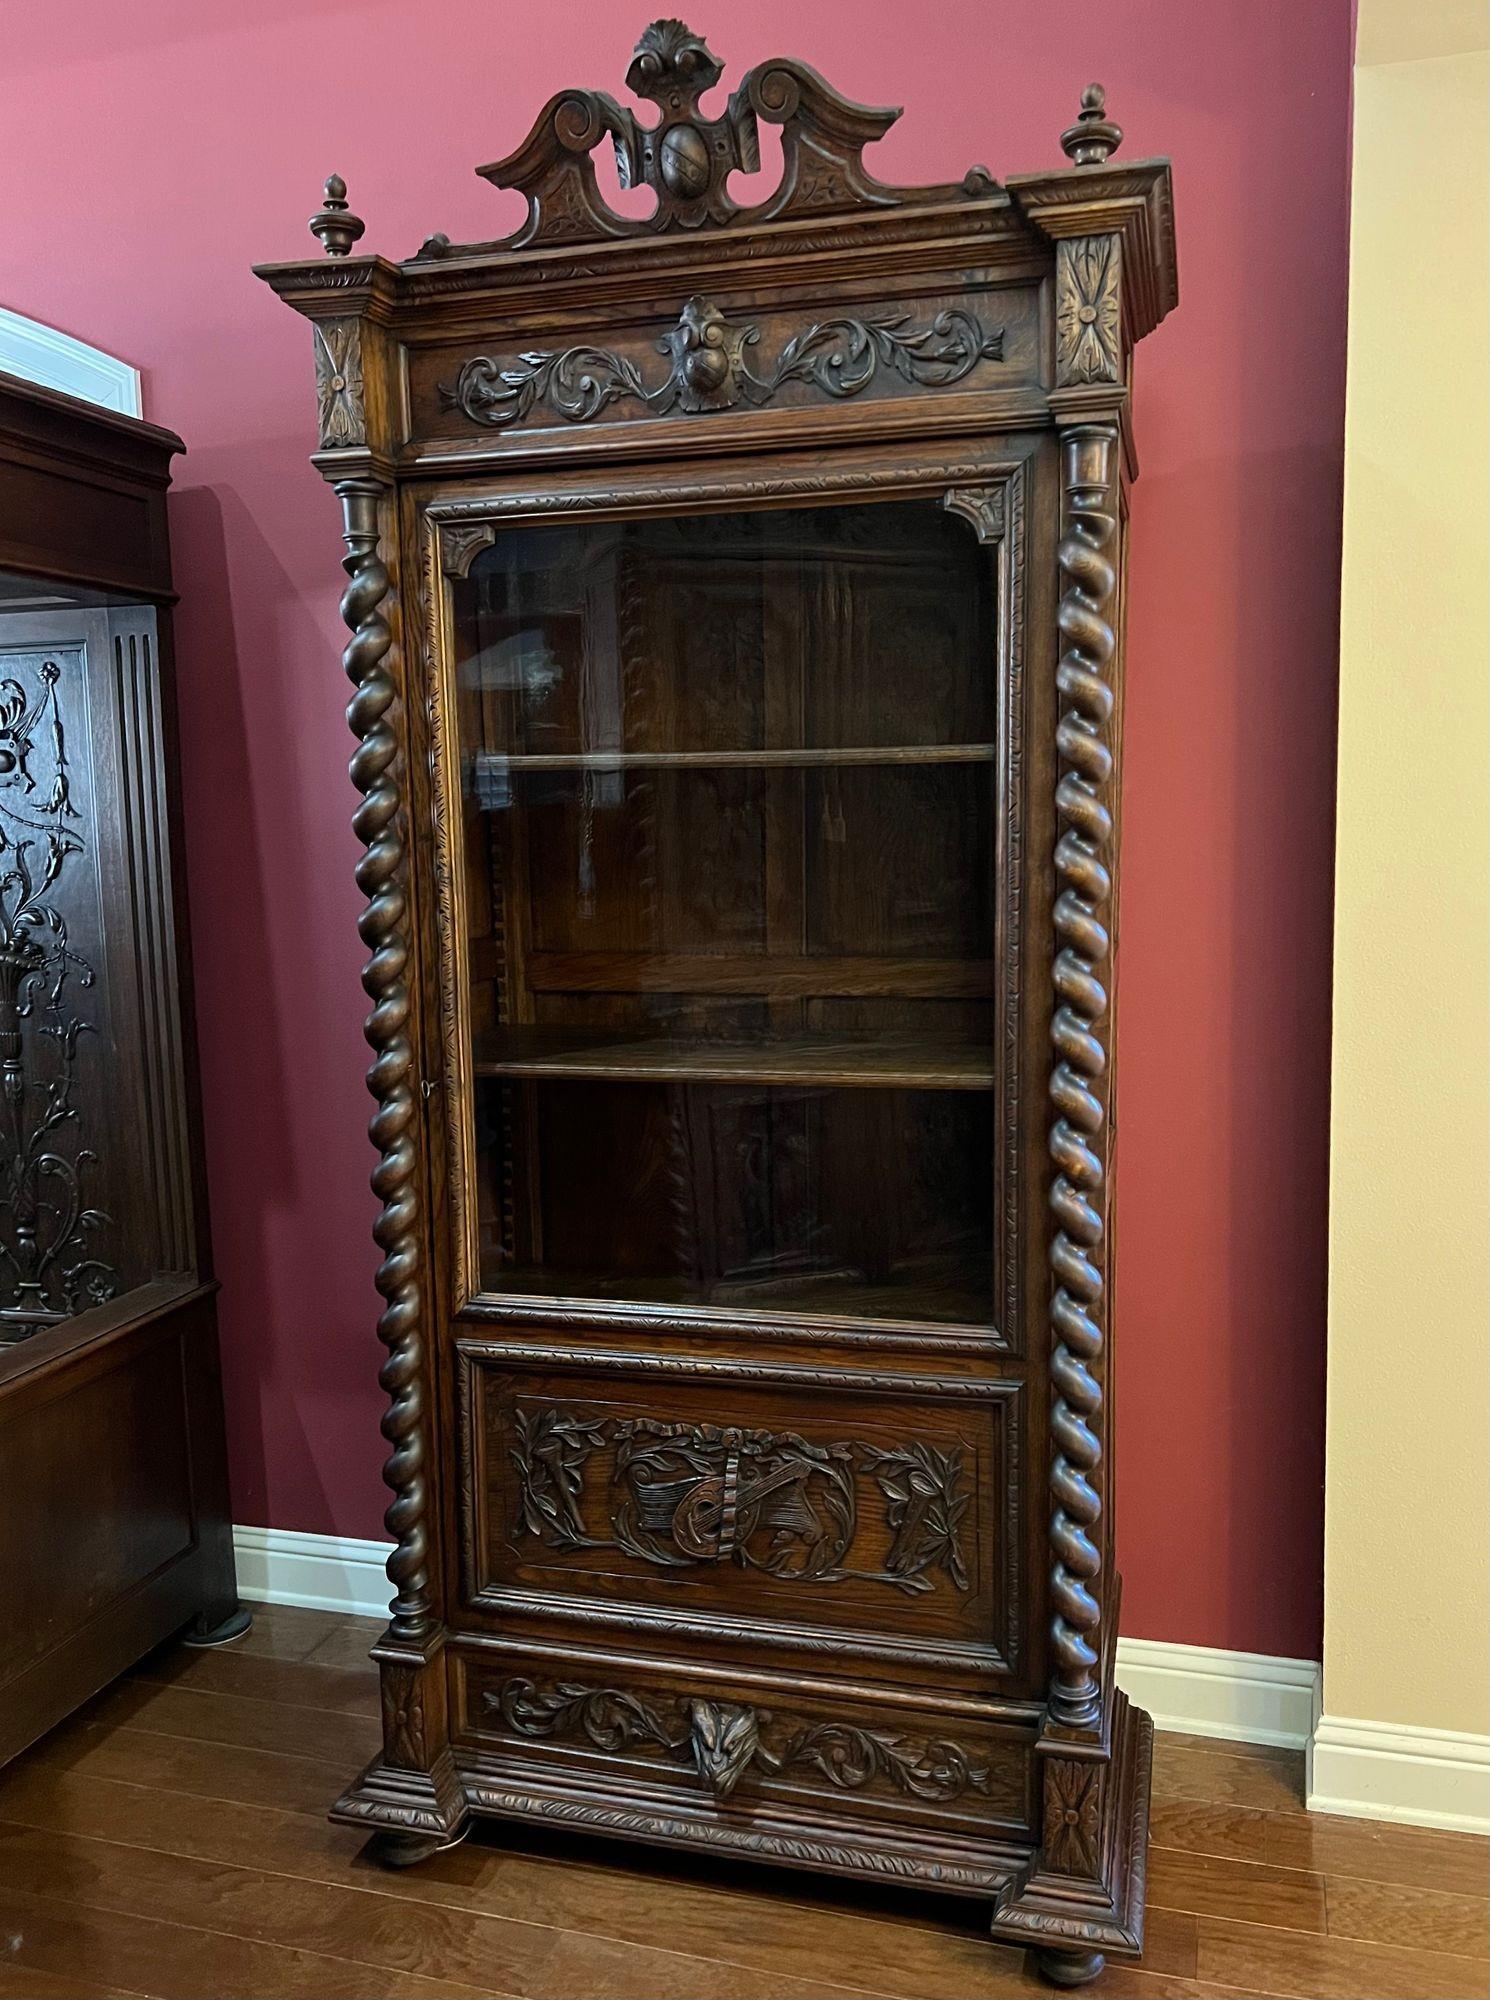 Antique French Vitrine Cabinet Bookcase Barley Twist Black Forest Carved Oak.
 
Direct from France, a stunning antique French bookcase/cabinet, with an unusually SLENDER profile, yet very tall and majestic (7 ft) and completely covered with